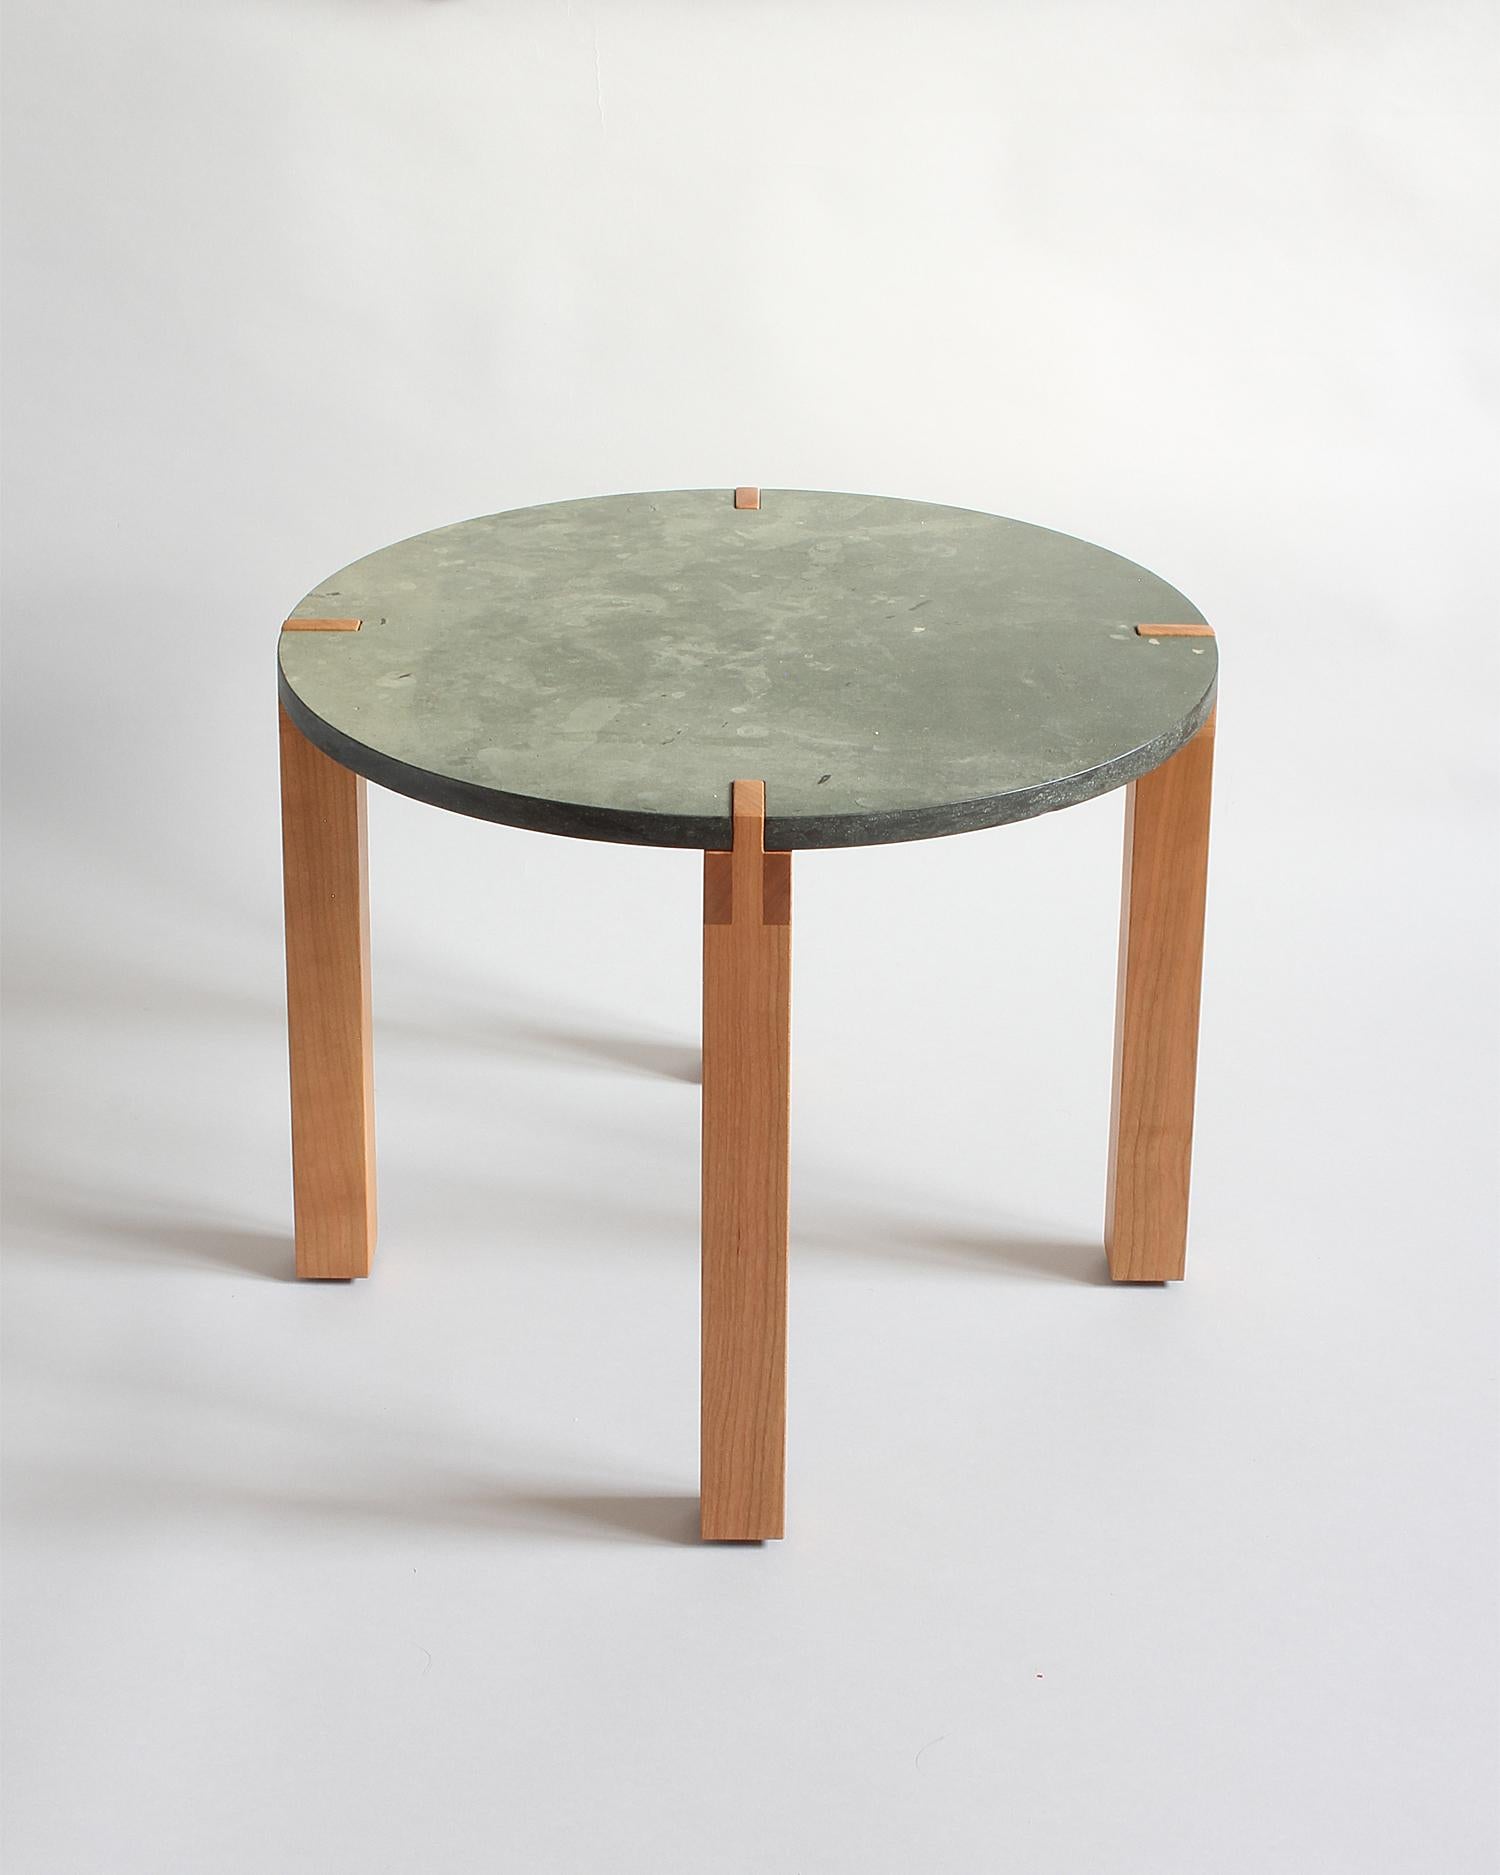 Green limestone top with a honed finish notches into intricately joined solid cherry base. This piece is made and ready to ship from Los Angeles. Solid American Cherry is hand selected from a family run lumber yard for clarity and aesthetics. 
The